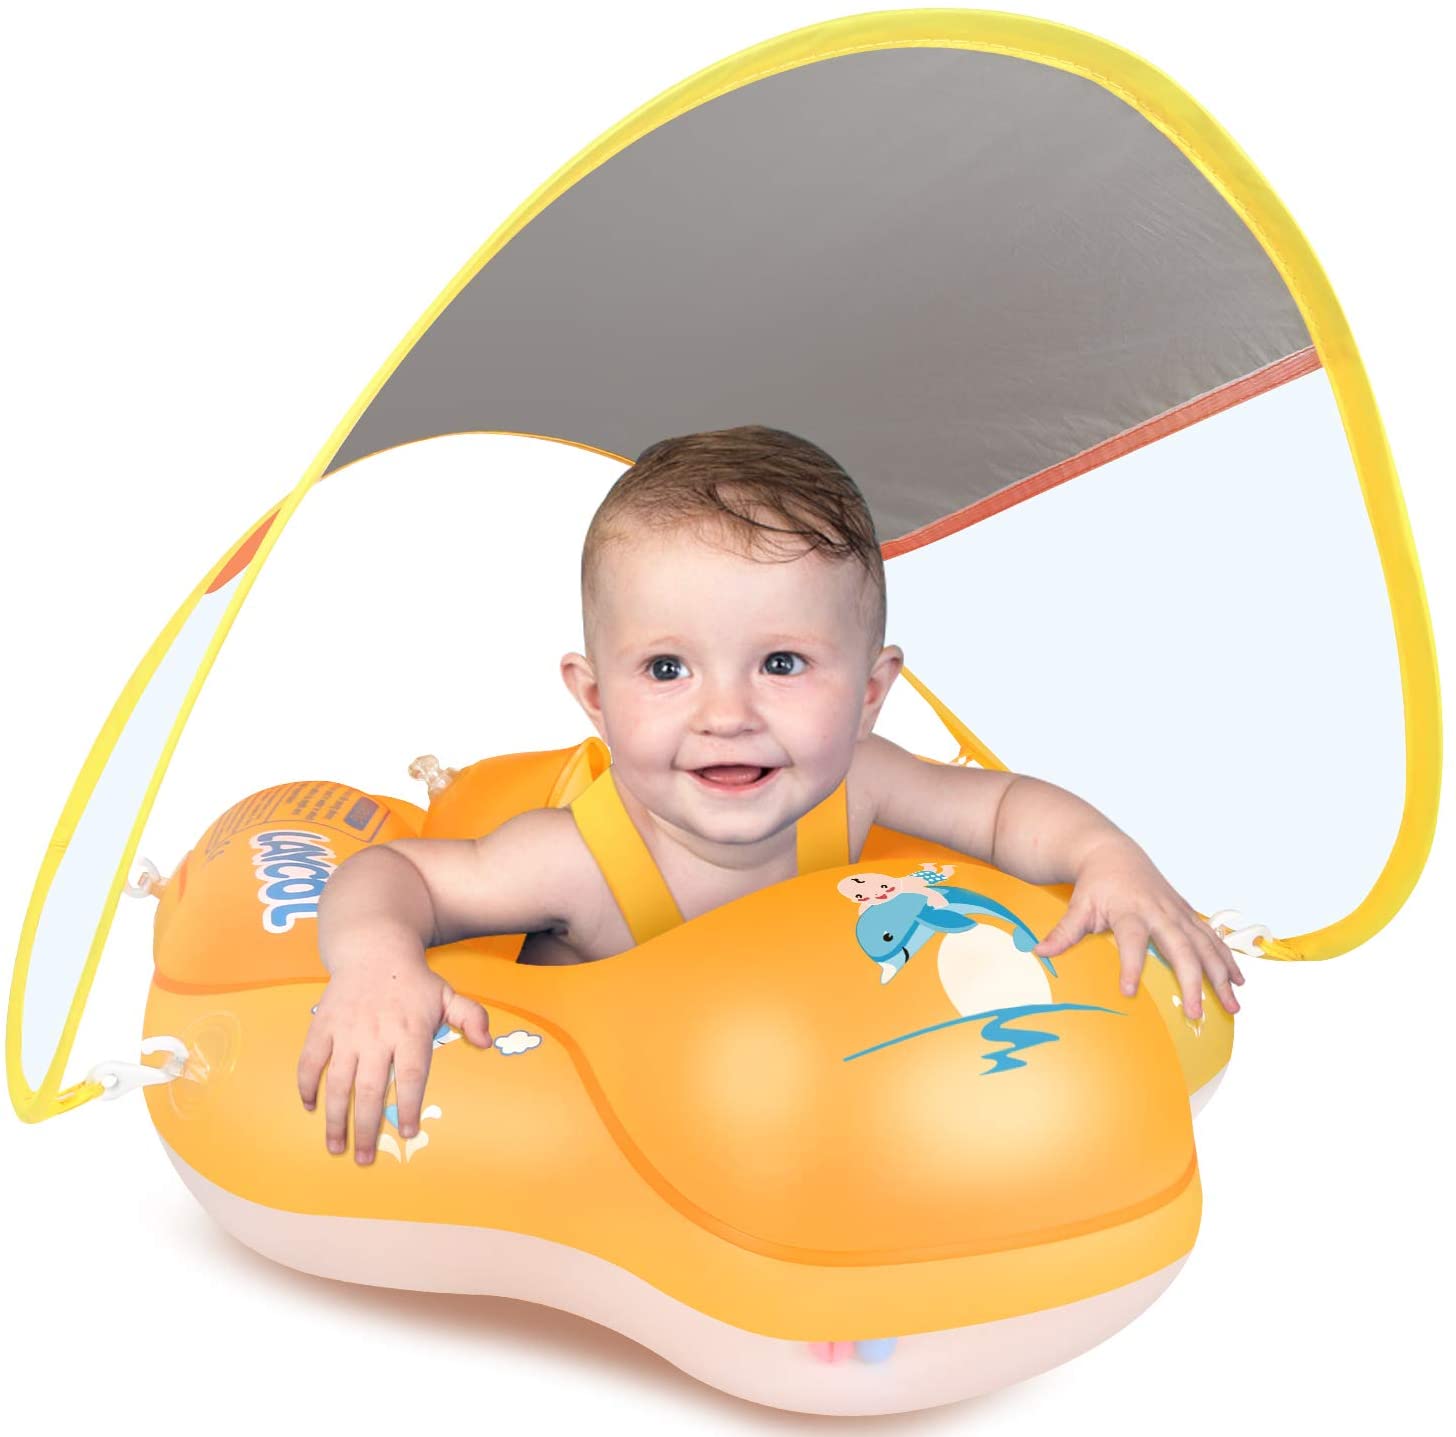 LAYCOL Infant Covered Floatie